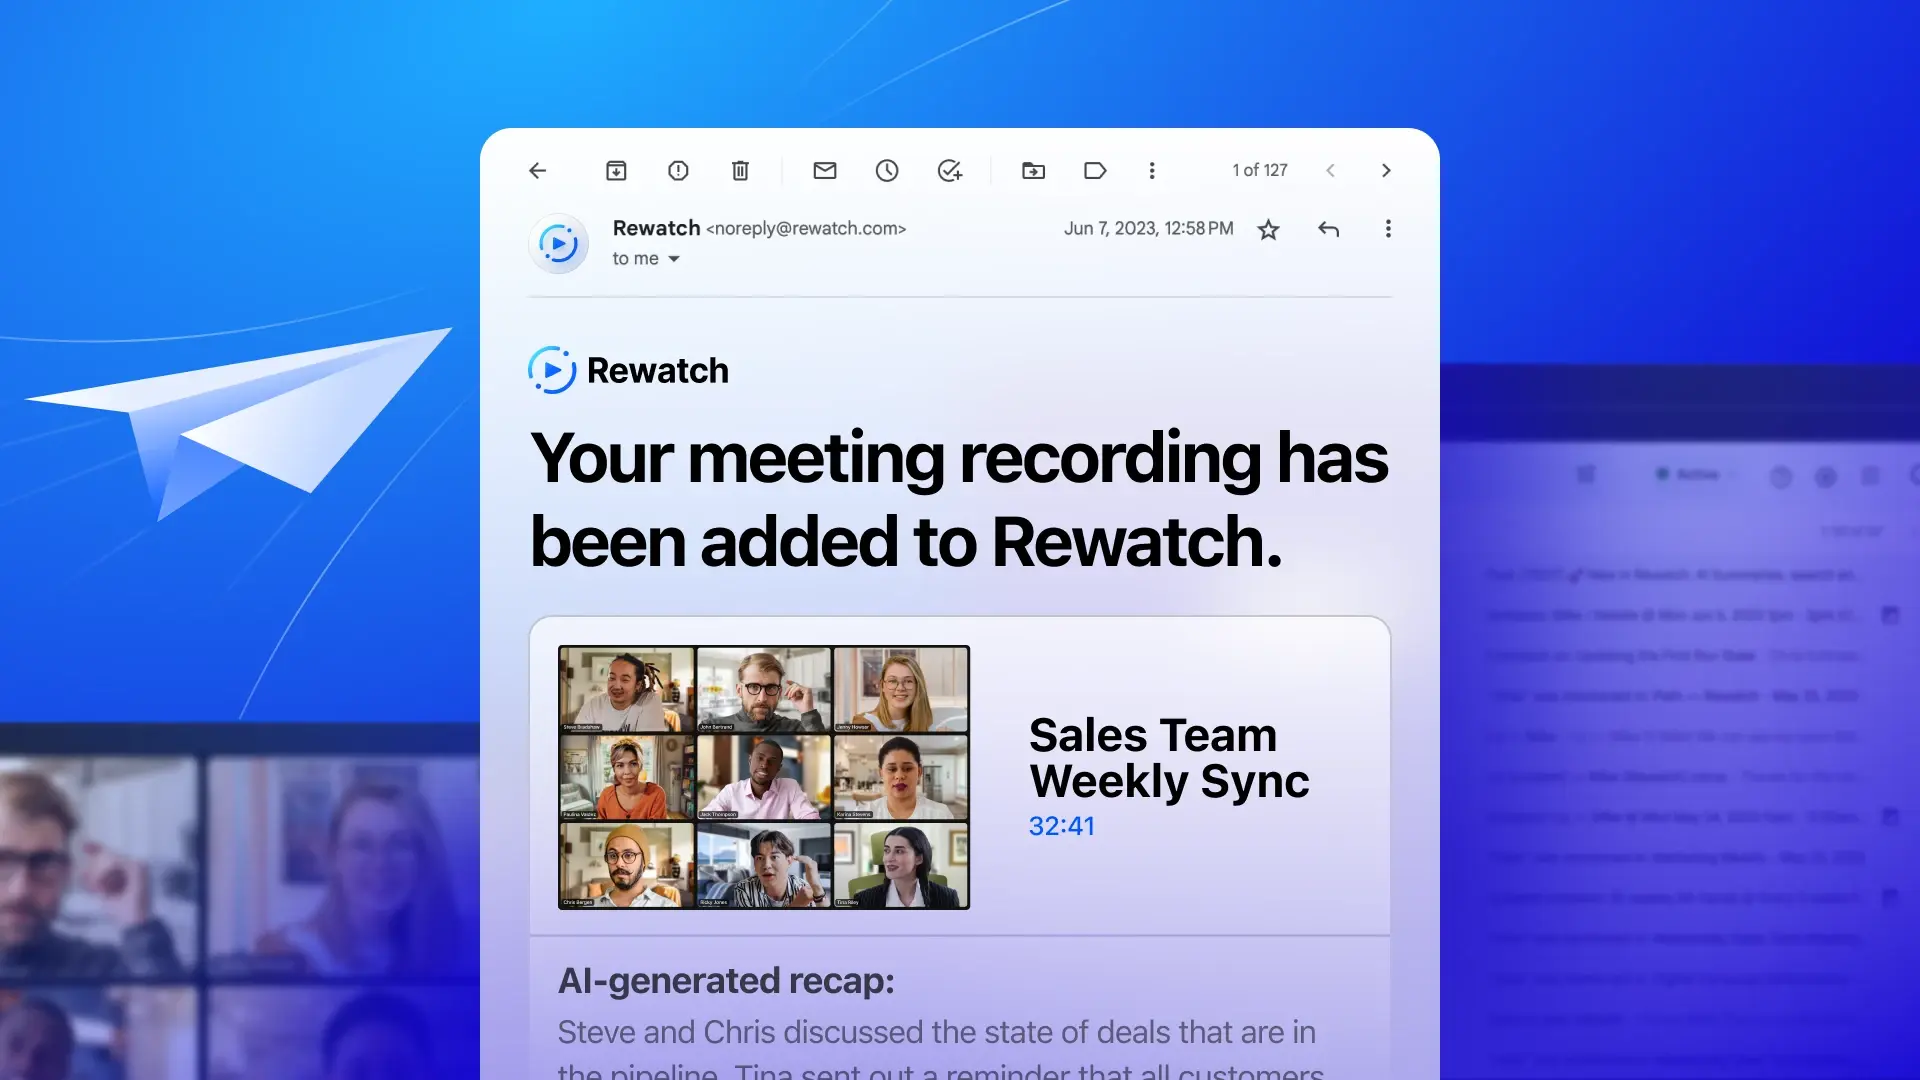 Image of a email notification from Rewatch with a meeting link and AI-generated summary content.